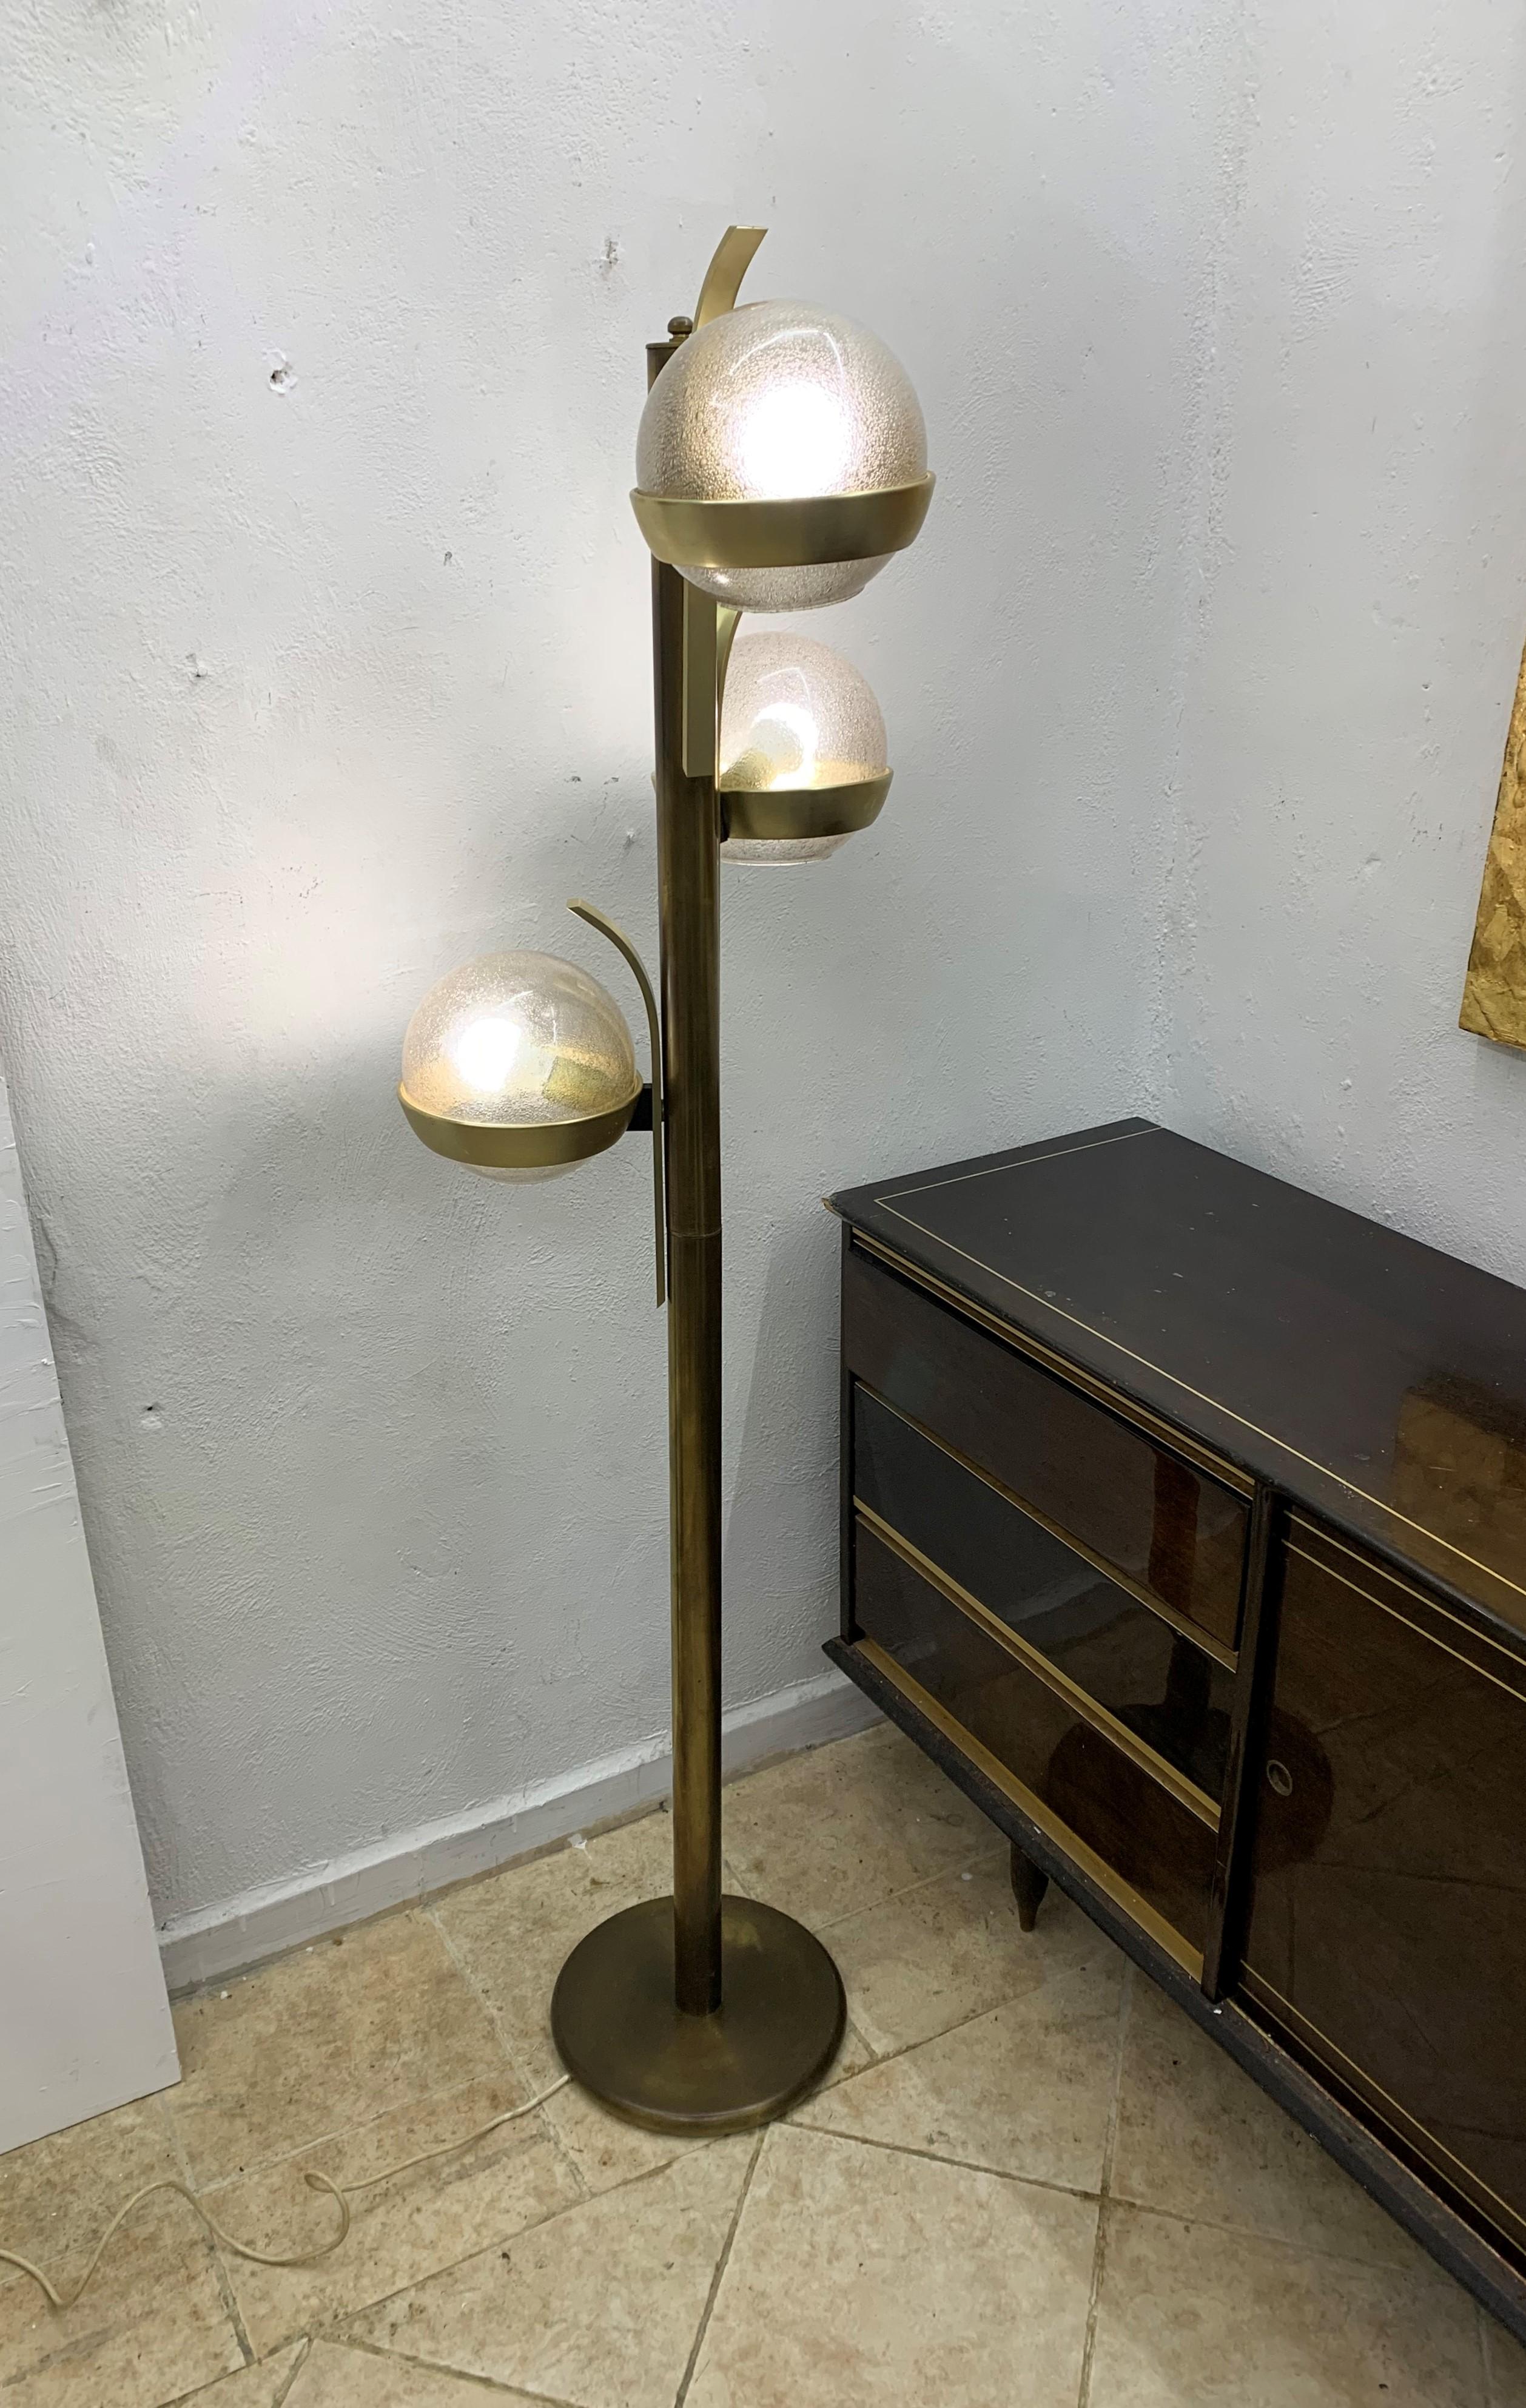 Space Age Floor Lamp by Lumi in Brass and Murano Glass, circa 1960s For Sale 5